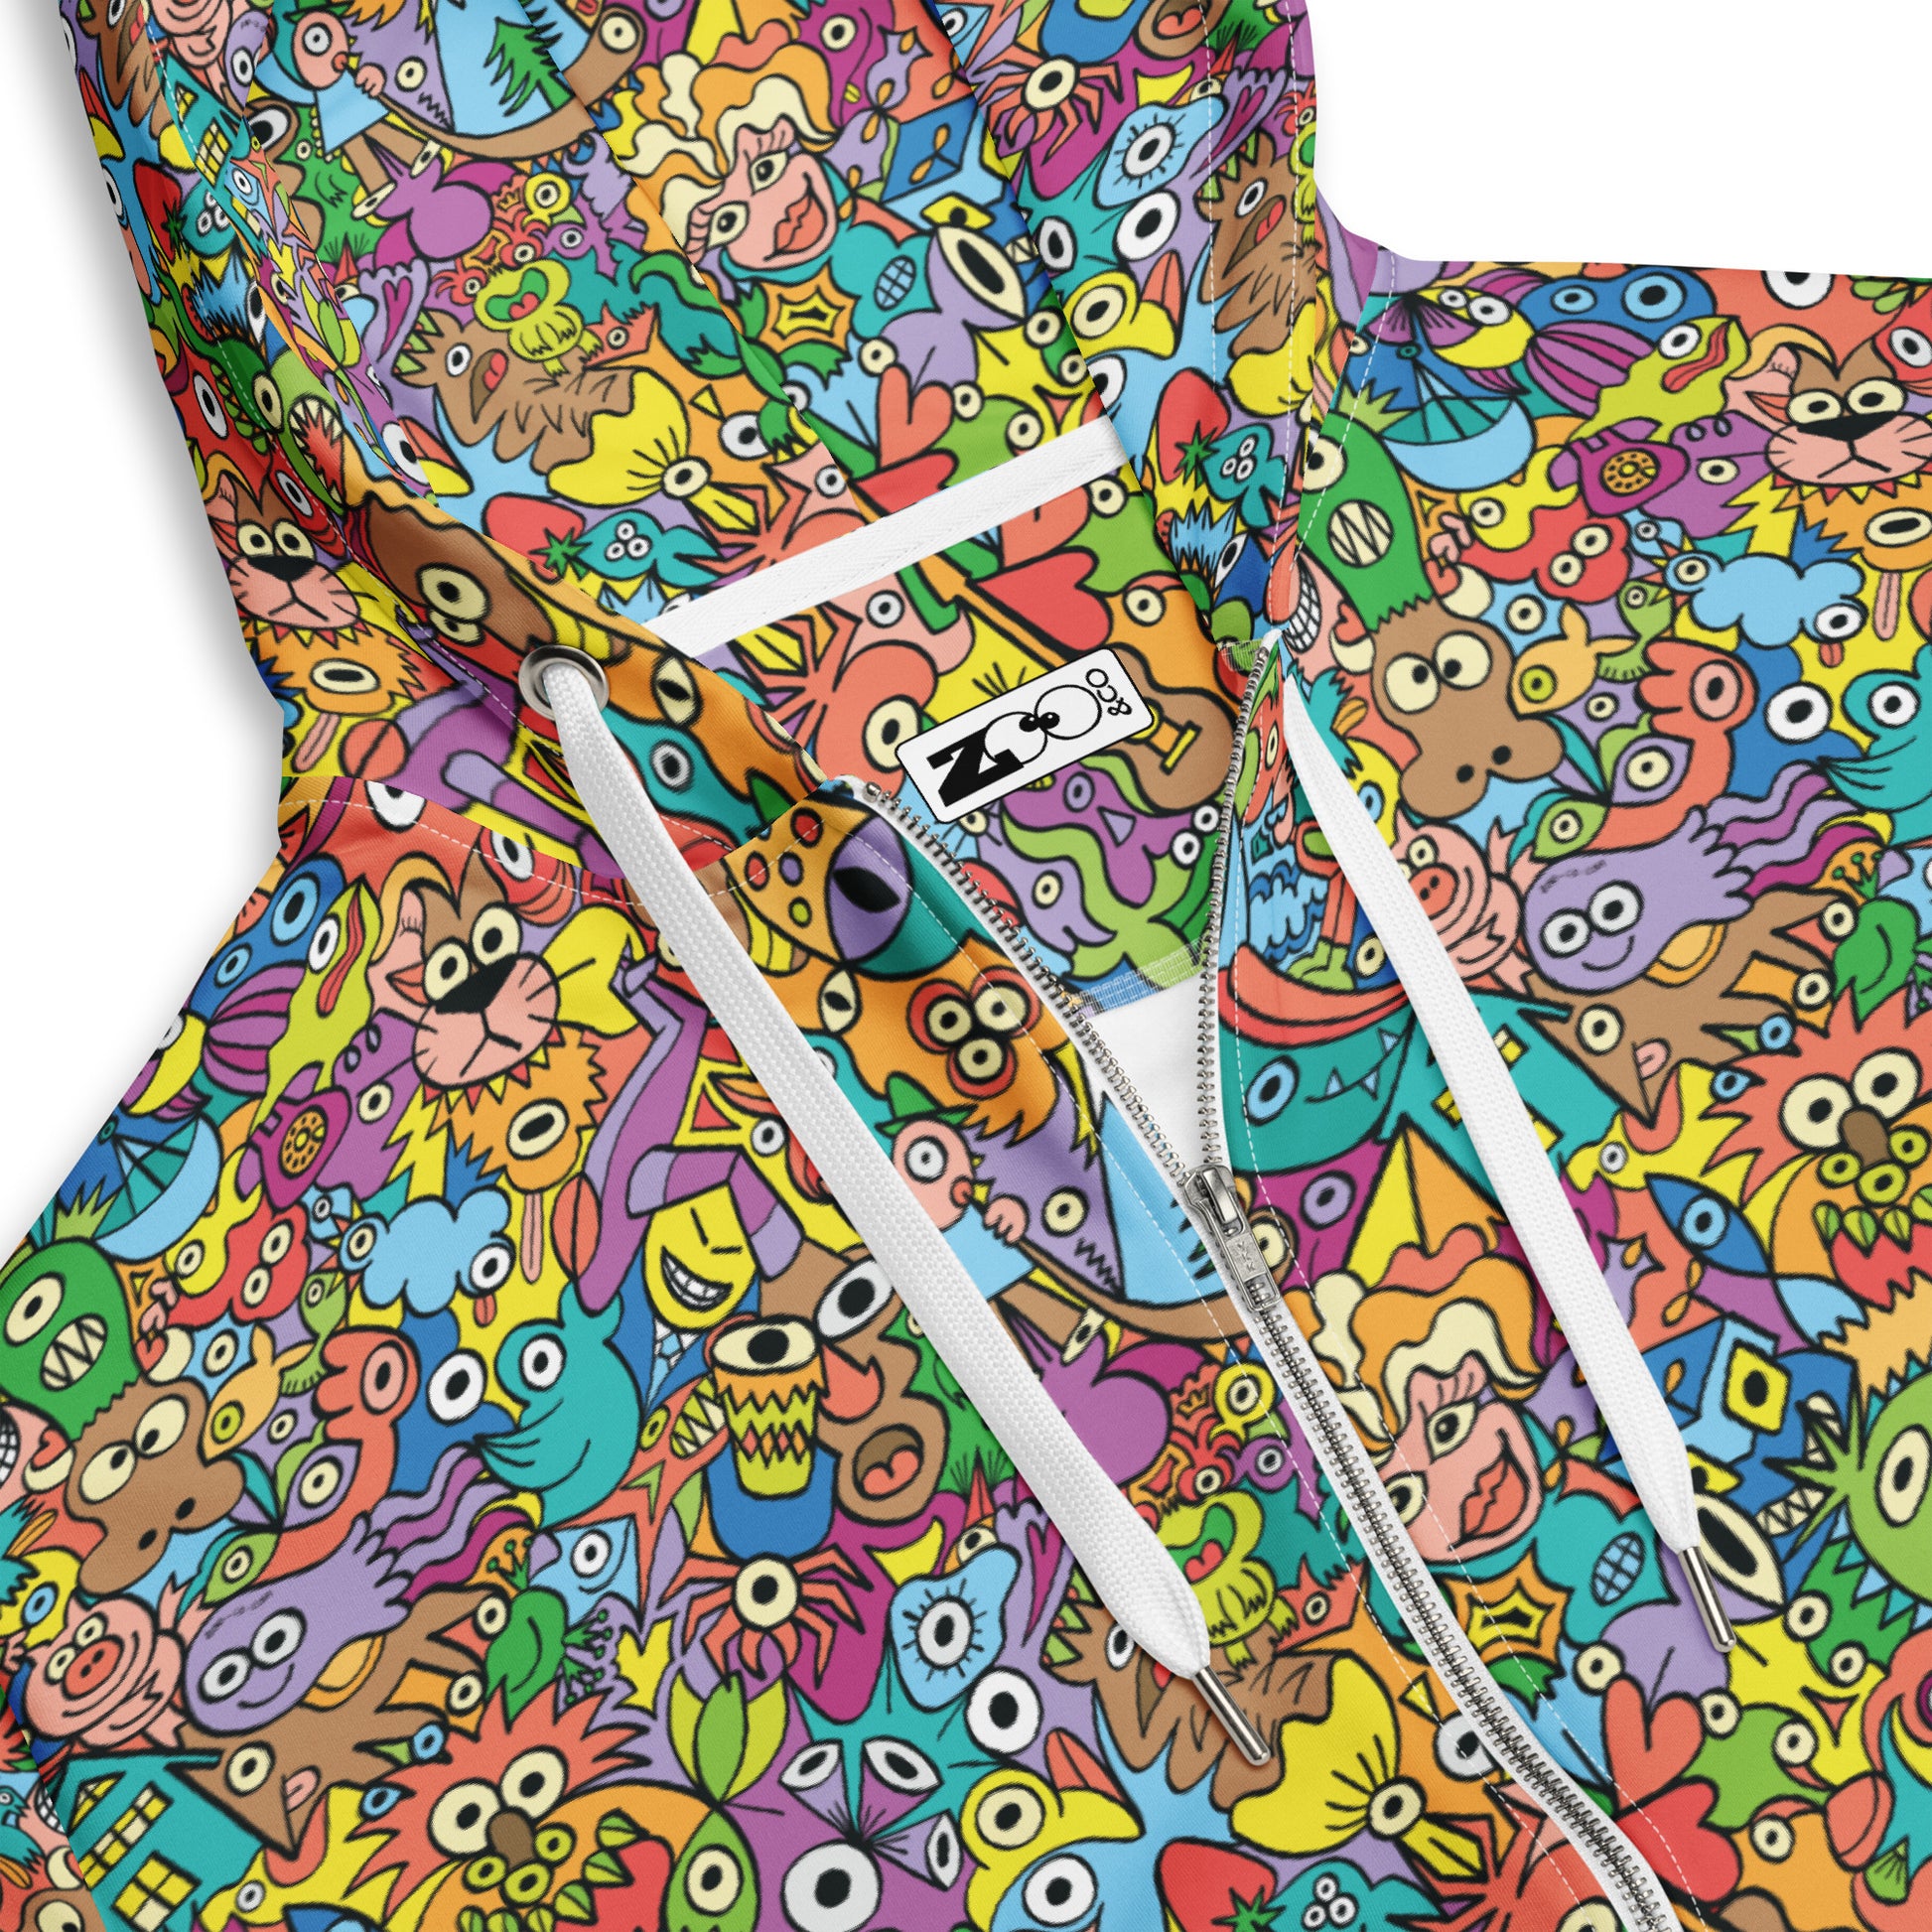 Cheerful crowd enjoying a lively carnival - Unisex zip hoodie. Product detail